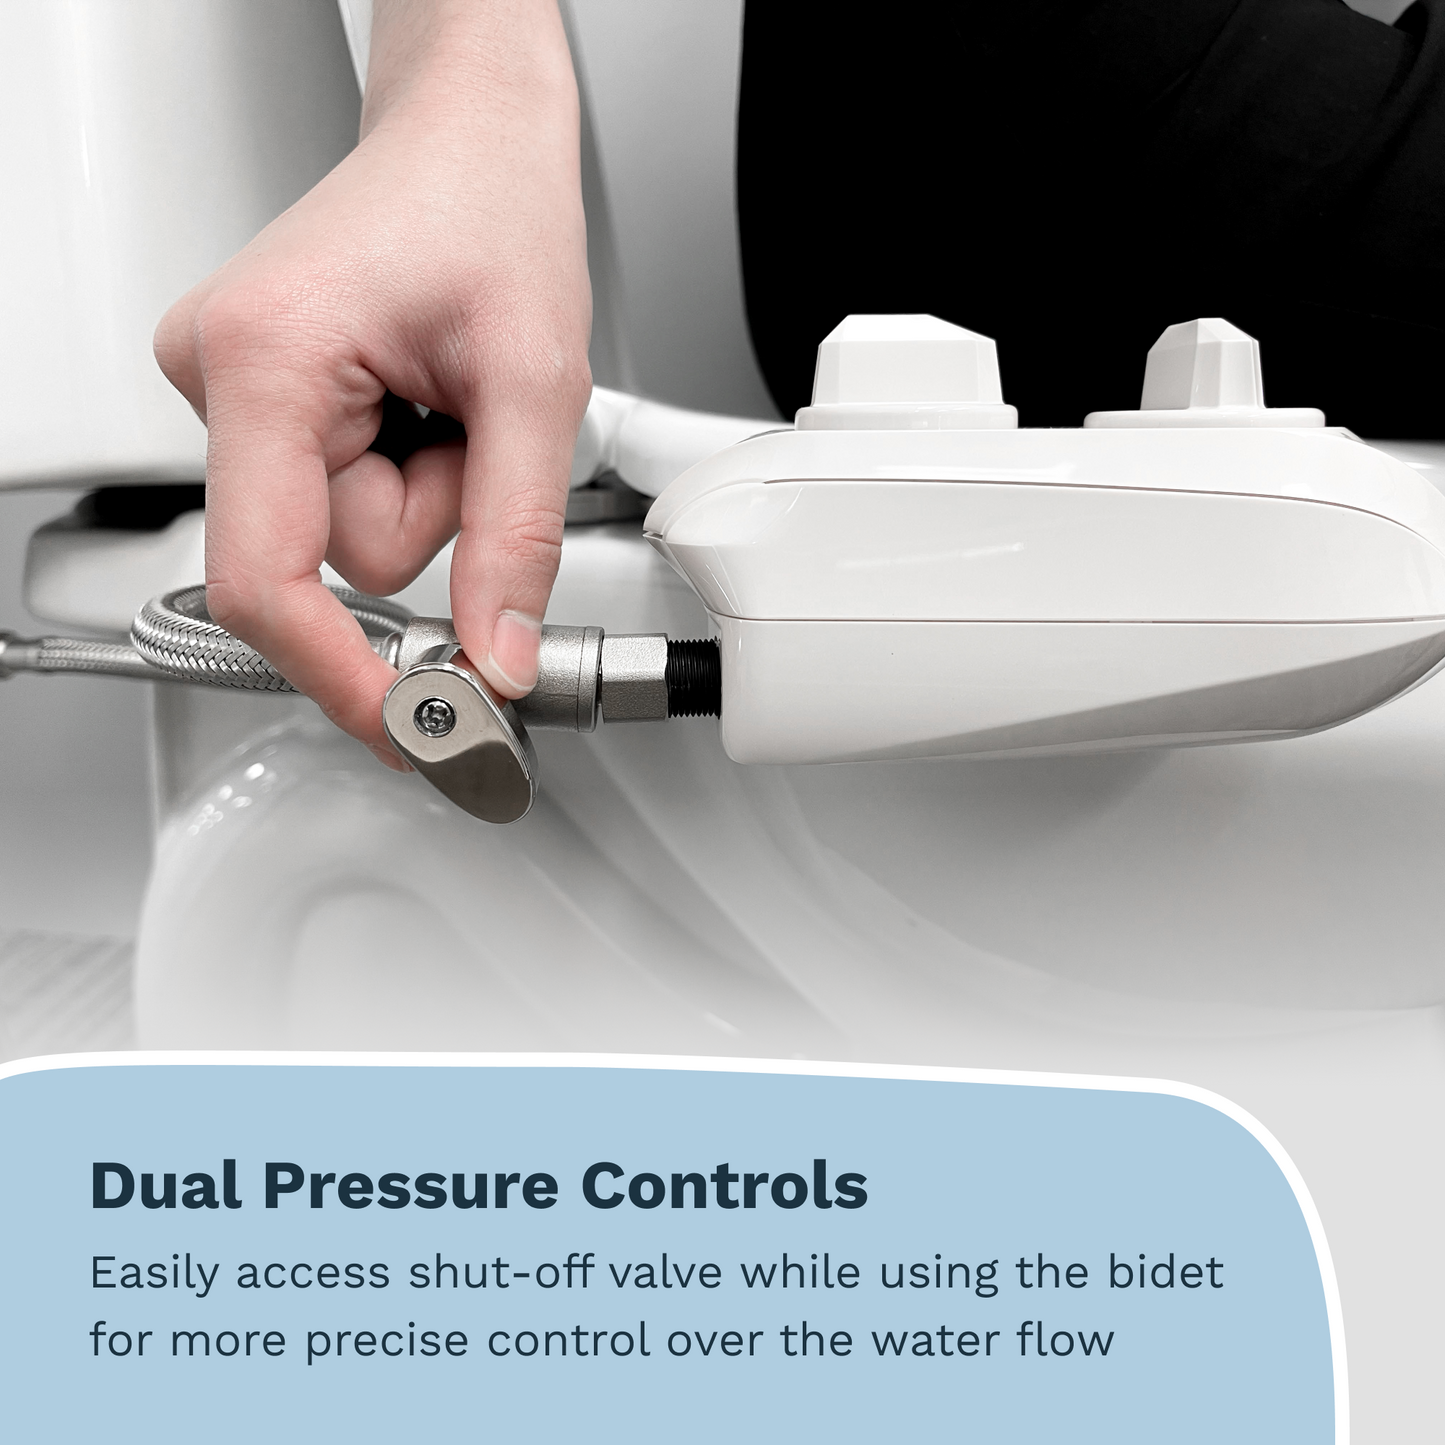 Easily adjust the water flow on the Cold Water Shut-Off Hose while sitting on the toilet